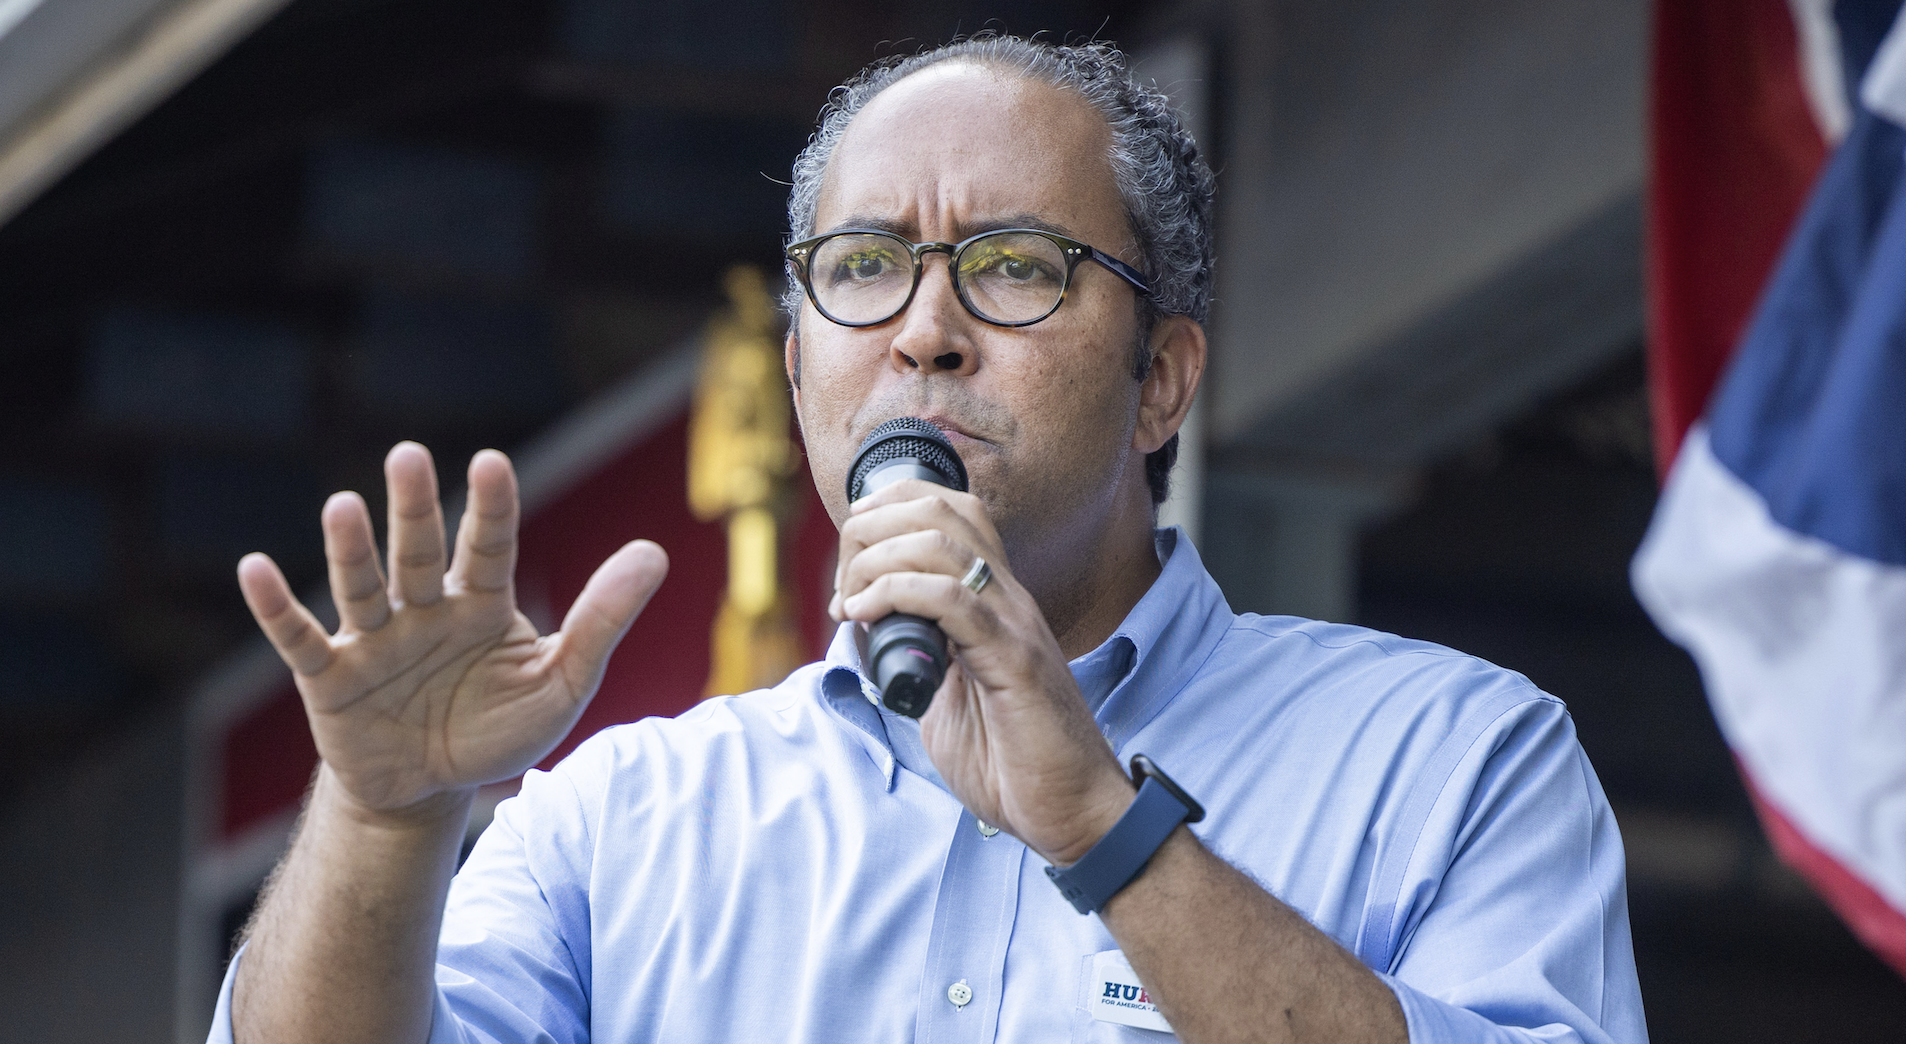 Will Hurd withdraws from GOP primary, backs fellow candidate for president.